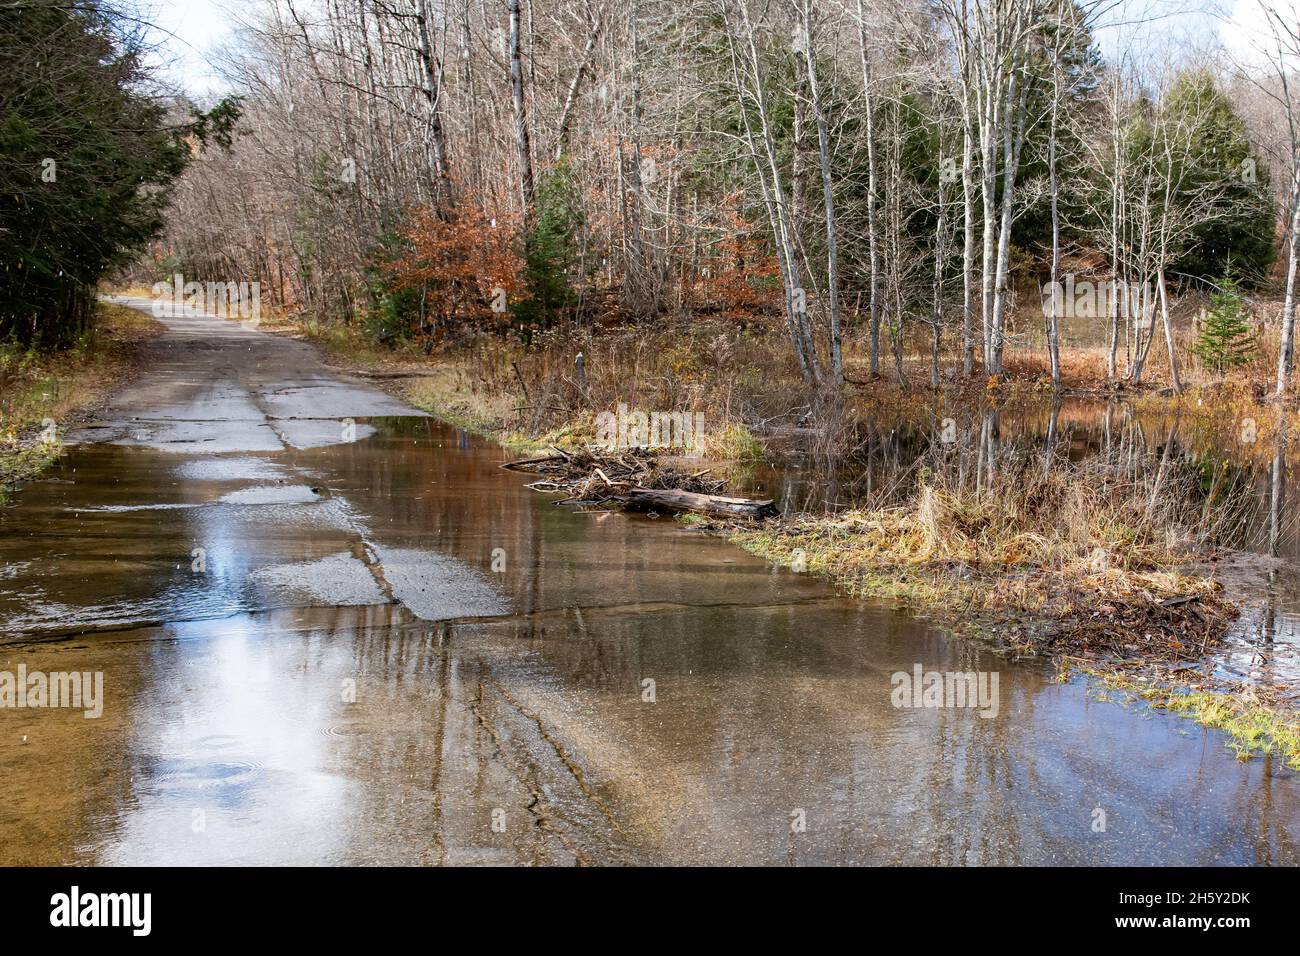 Water flowing over road due to beaver dam blocking the culvert under the road with mud and sticks in the Adirondack Mountains wilderness. Stock Photo